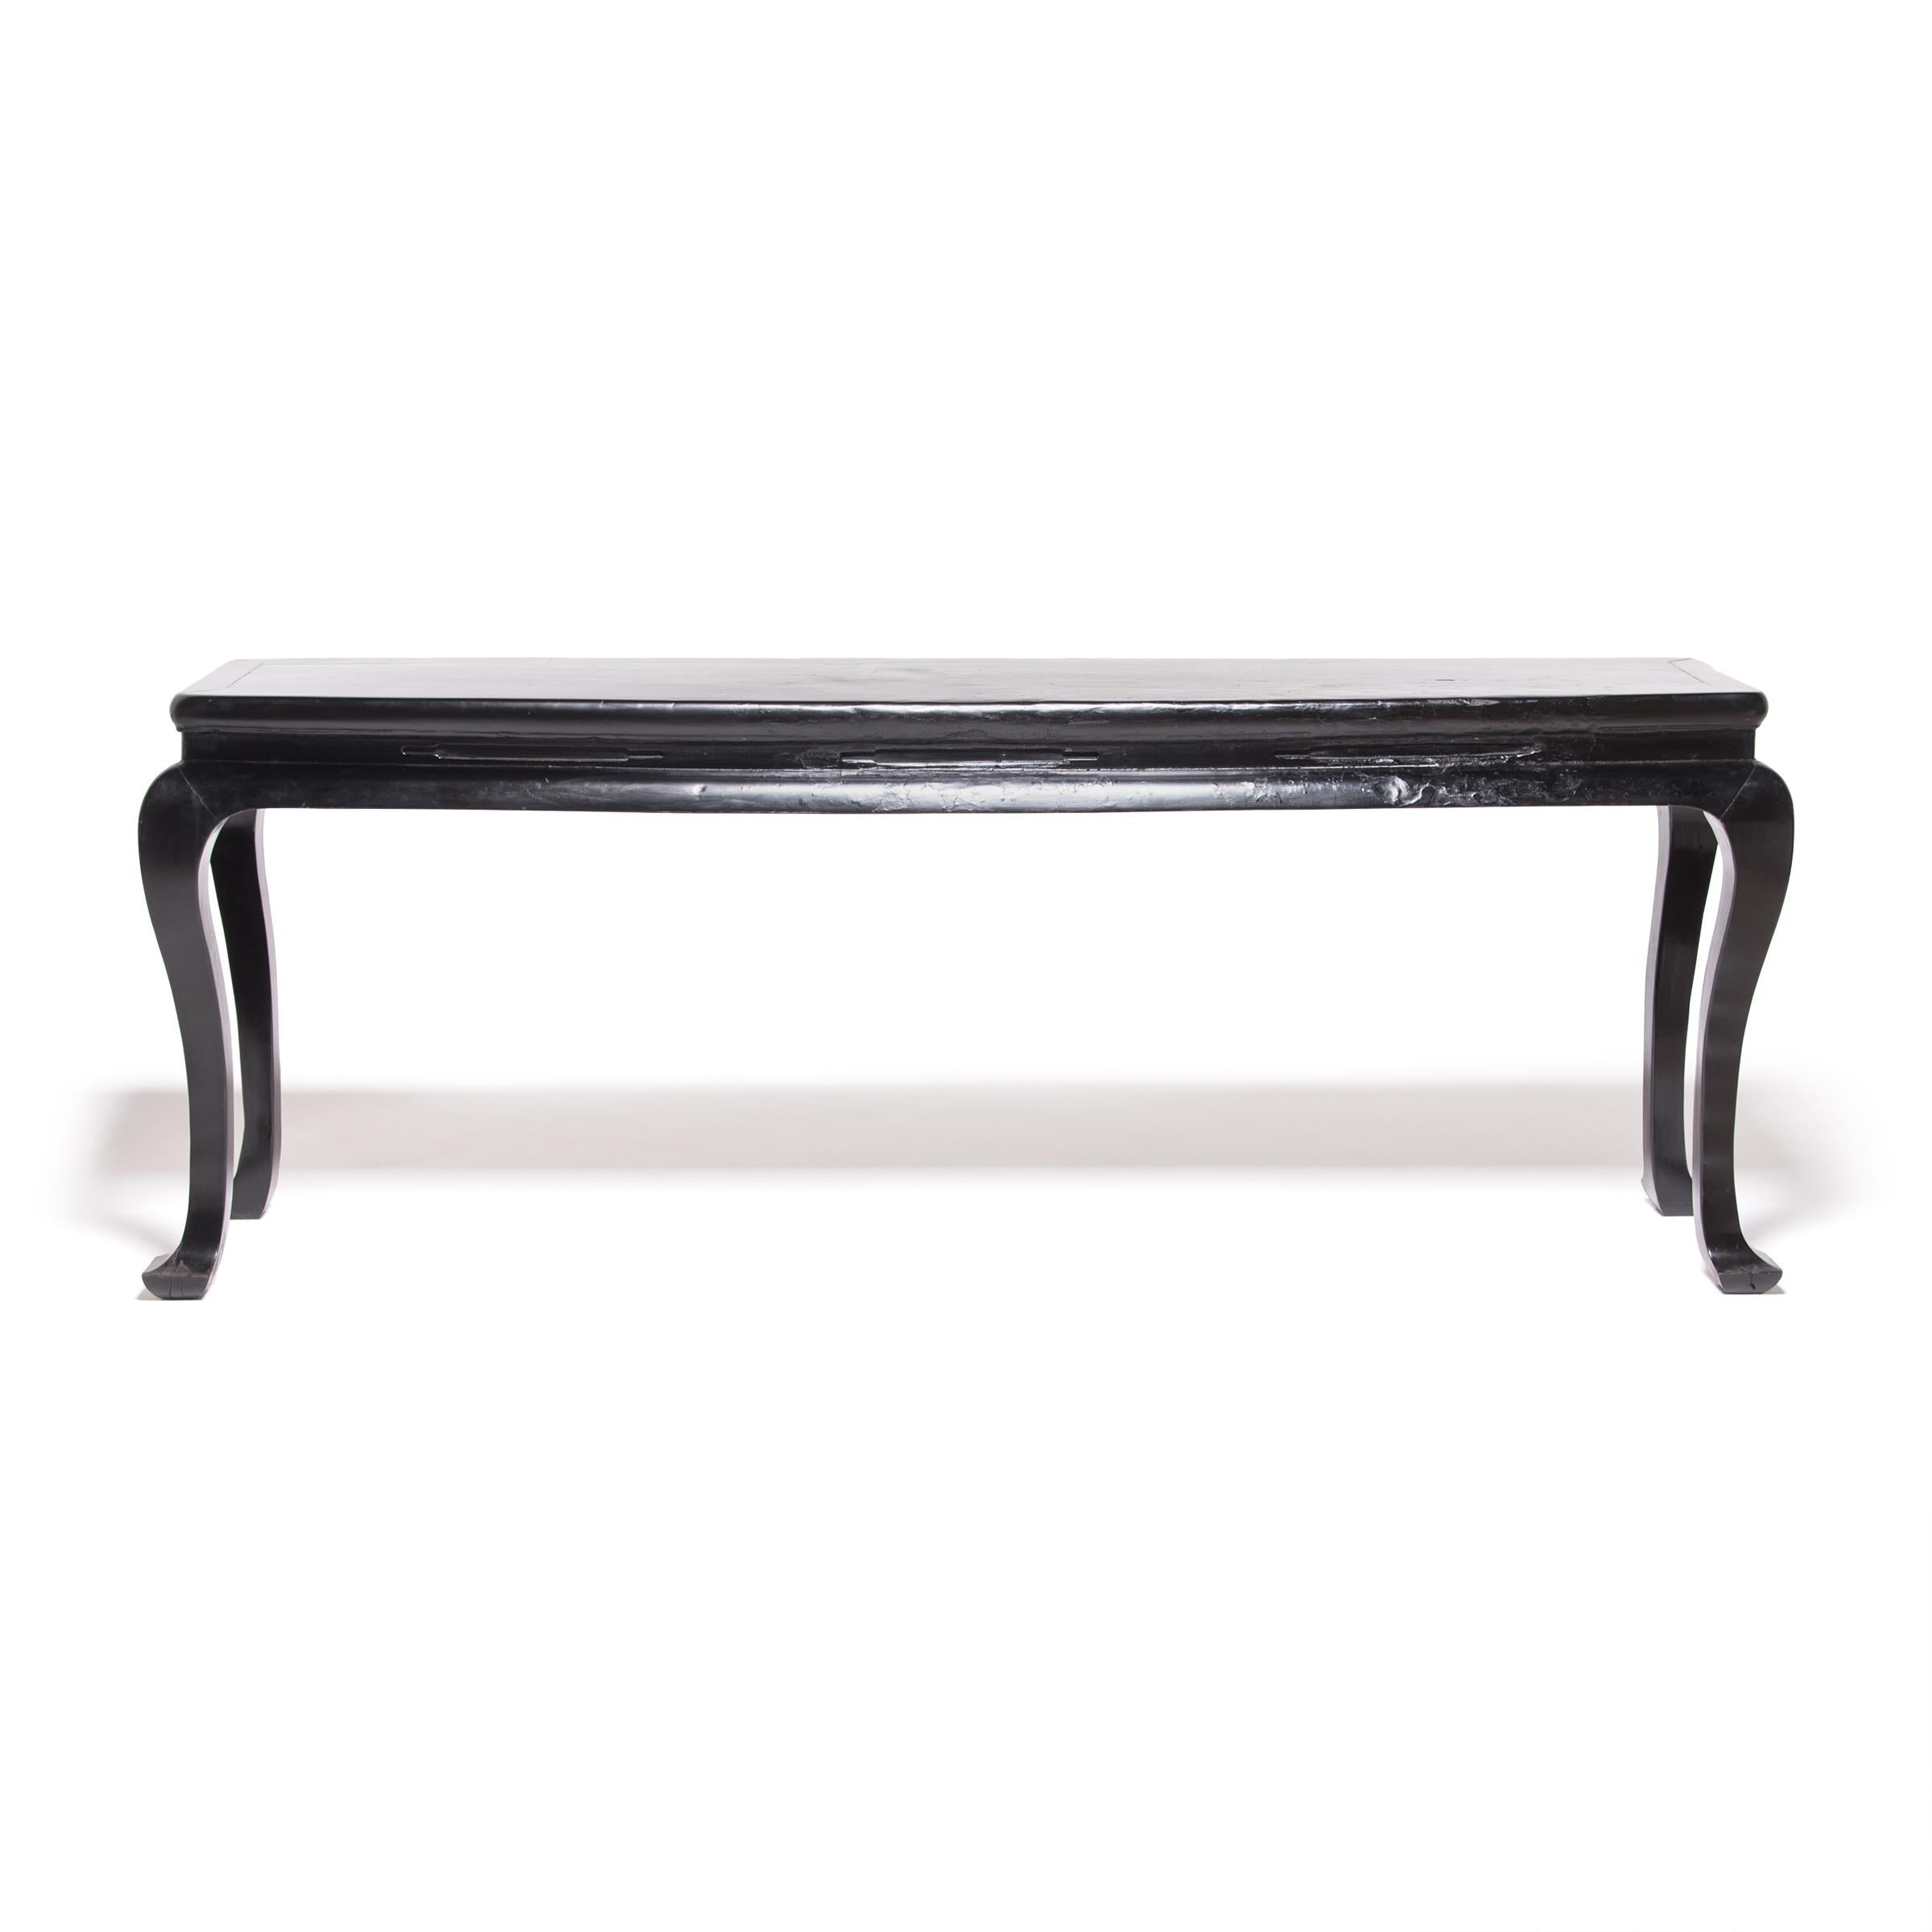 Chinese Black Lacquer Splayed Foot Scholars' Table, c. 1900 For Sale